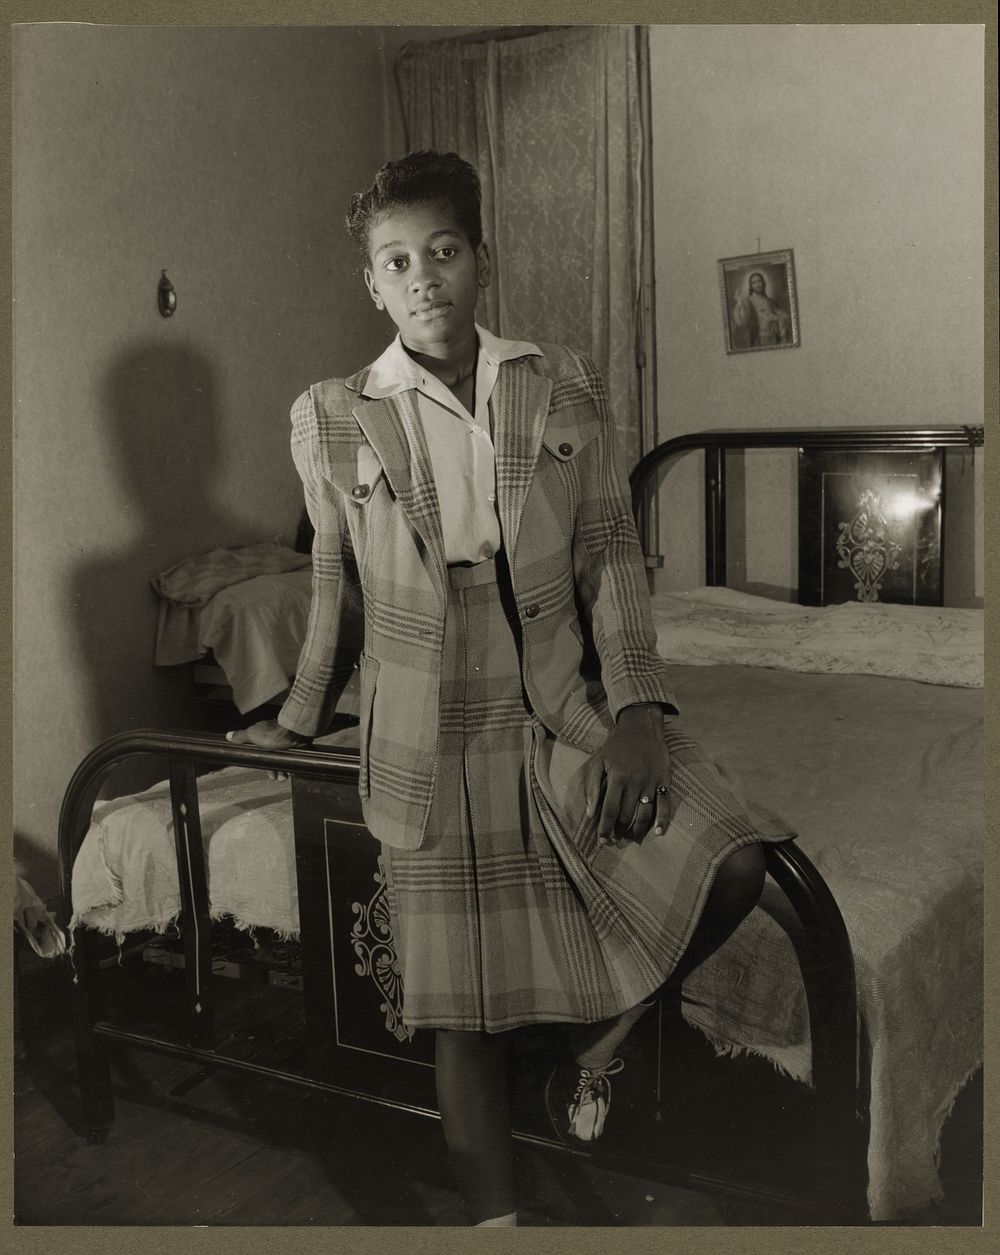 Washington, D.C. Adopted daughter of Mrs. Ella Watson, a government charwoman. Sourced from the Library of Congress.